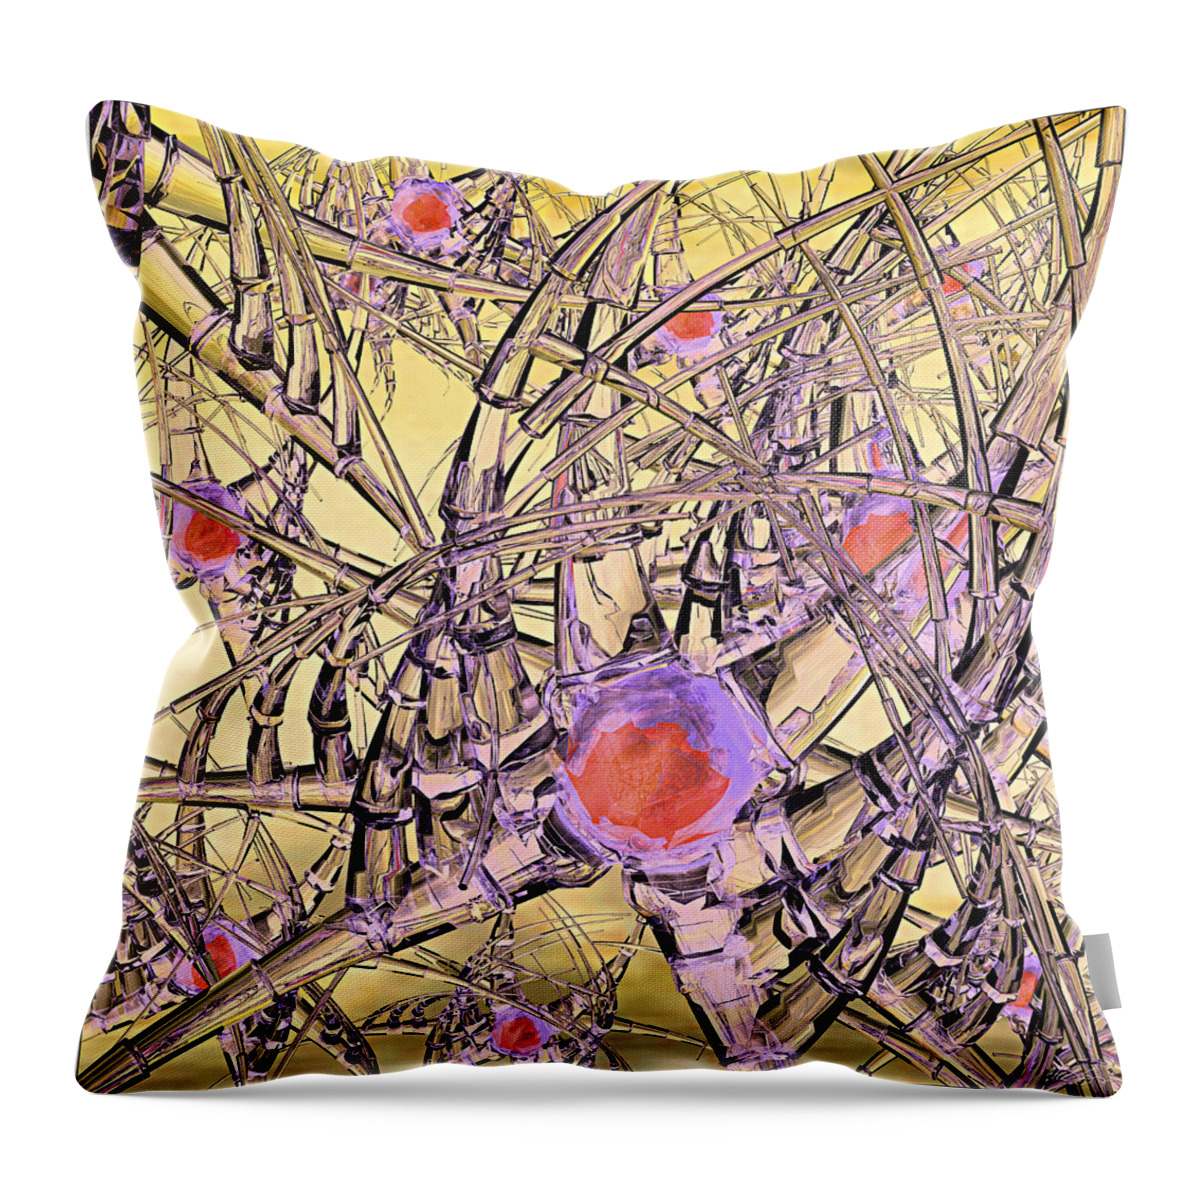 Neuron Throw Pillow featuring the digital art Grobo Experiment 2 by Peter J Sucy